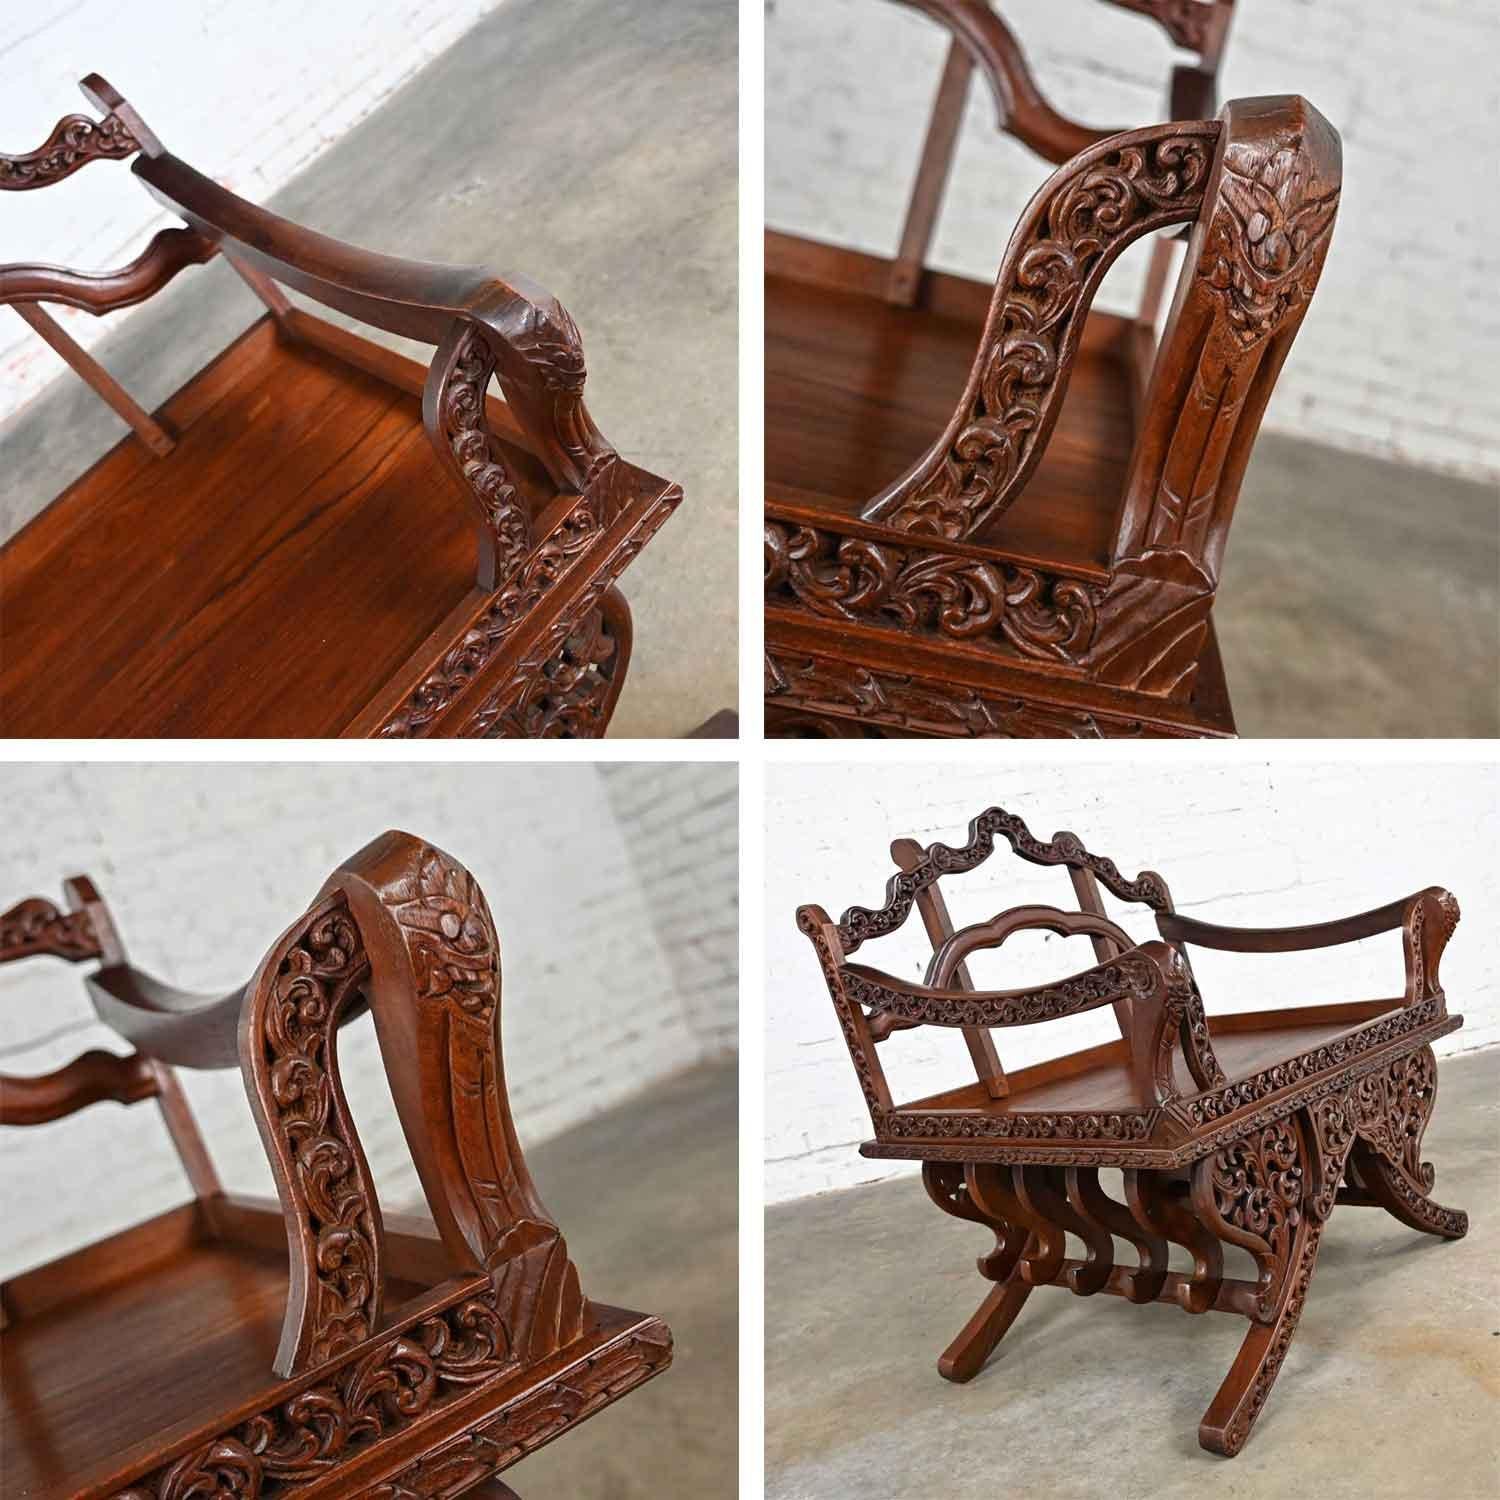 Chinoiserie Hand Carved Rosewood Howdah Elephant Saddle Chair Bangkok Thailand For Sale 6